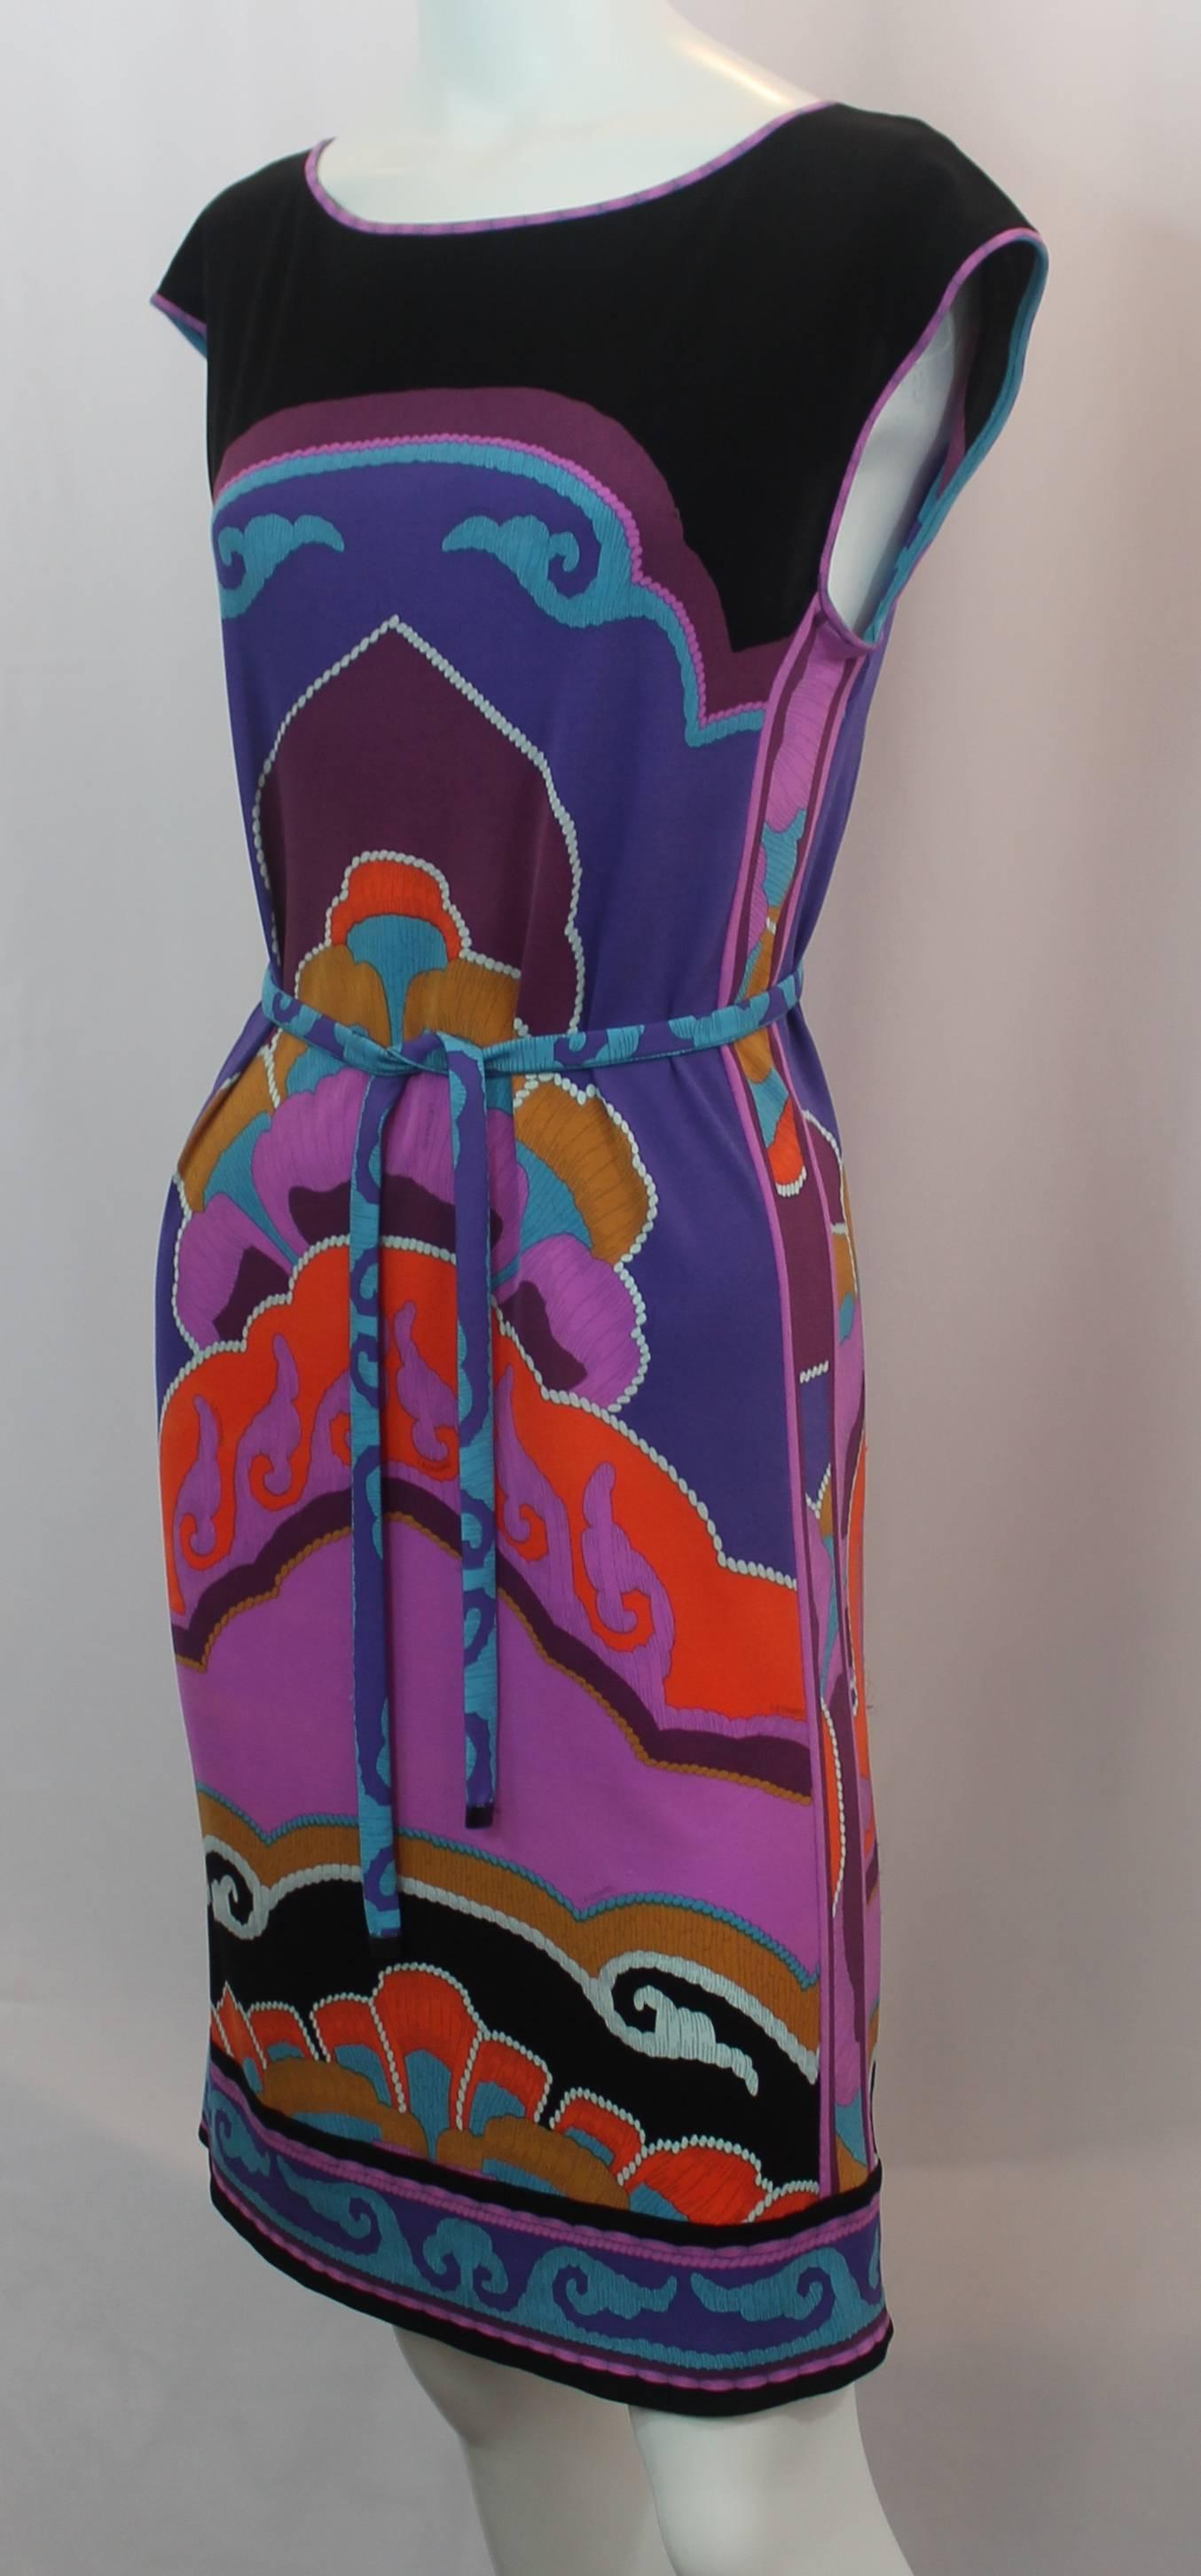 Leonard Multi-Colored Silk Jersey Moroccan Print Sleeveless Dress - 36. This fun dress is sleeveless with a tie belt. It has a slight shift shape to it and has a large Moroccan print in black, purples, blues, and oranges. It is in fair condition